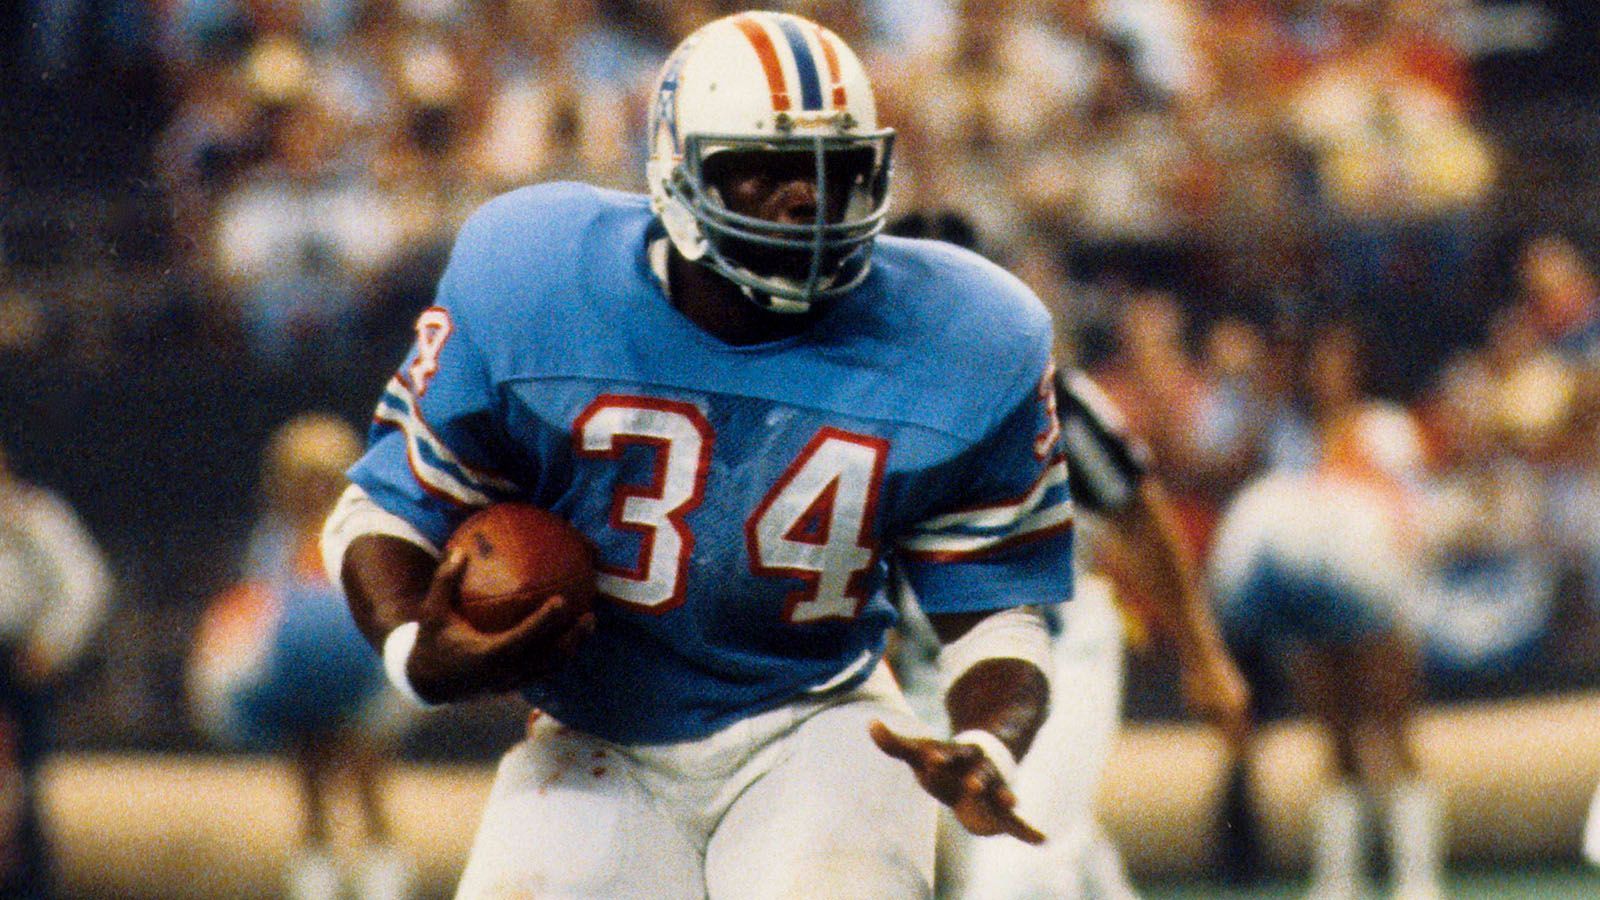 <strong>Earl Campbell - 1978</strong><br>Position: Running Back<br>Draft-Team: Houston Oilers<br>Erfolge: Heisman Trophy, 5x Pro Bowl, NFL MVP, Offensive Rookie of the Year, Pro Football Hall of Fame, 3x Offensive Player of the Year, <br>Karriereende: 1985